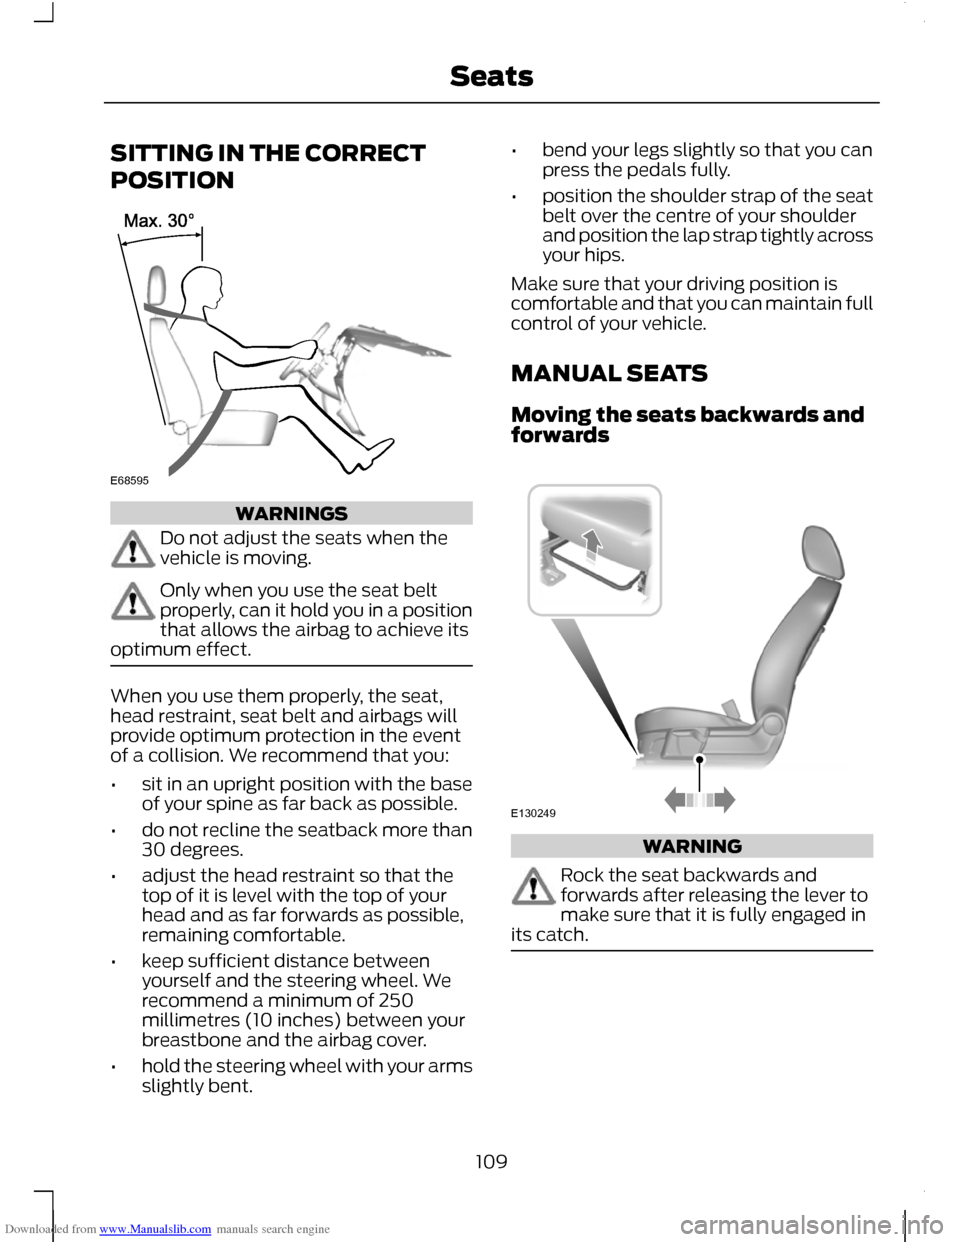 FORD C MAX 2011 2.G Service Manual Downloaded from www.Manualslib.com manuals search engine SITTING IN THE CORRECT
POSITION
WARNINGS
Do not adjust the seats when the
vehicle is moving.
Only when you use the seat belt
properly, can it h